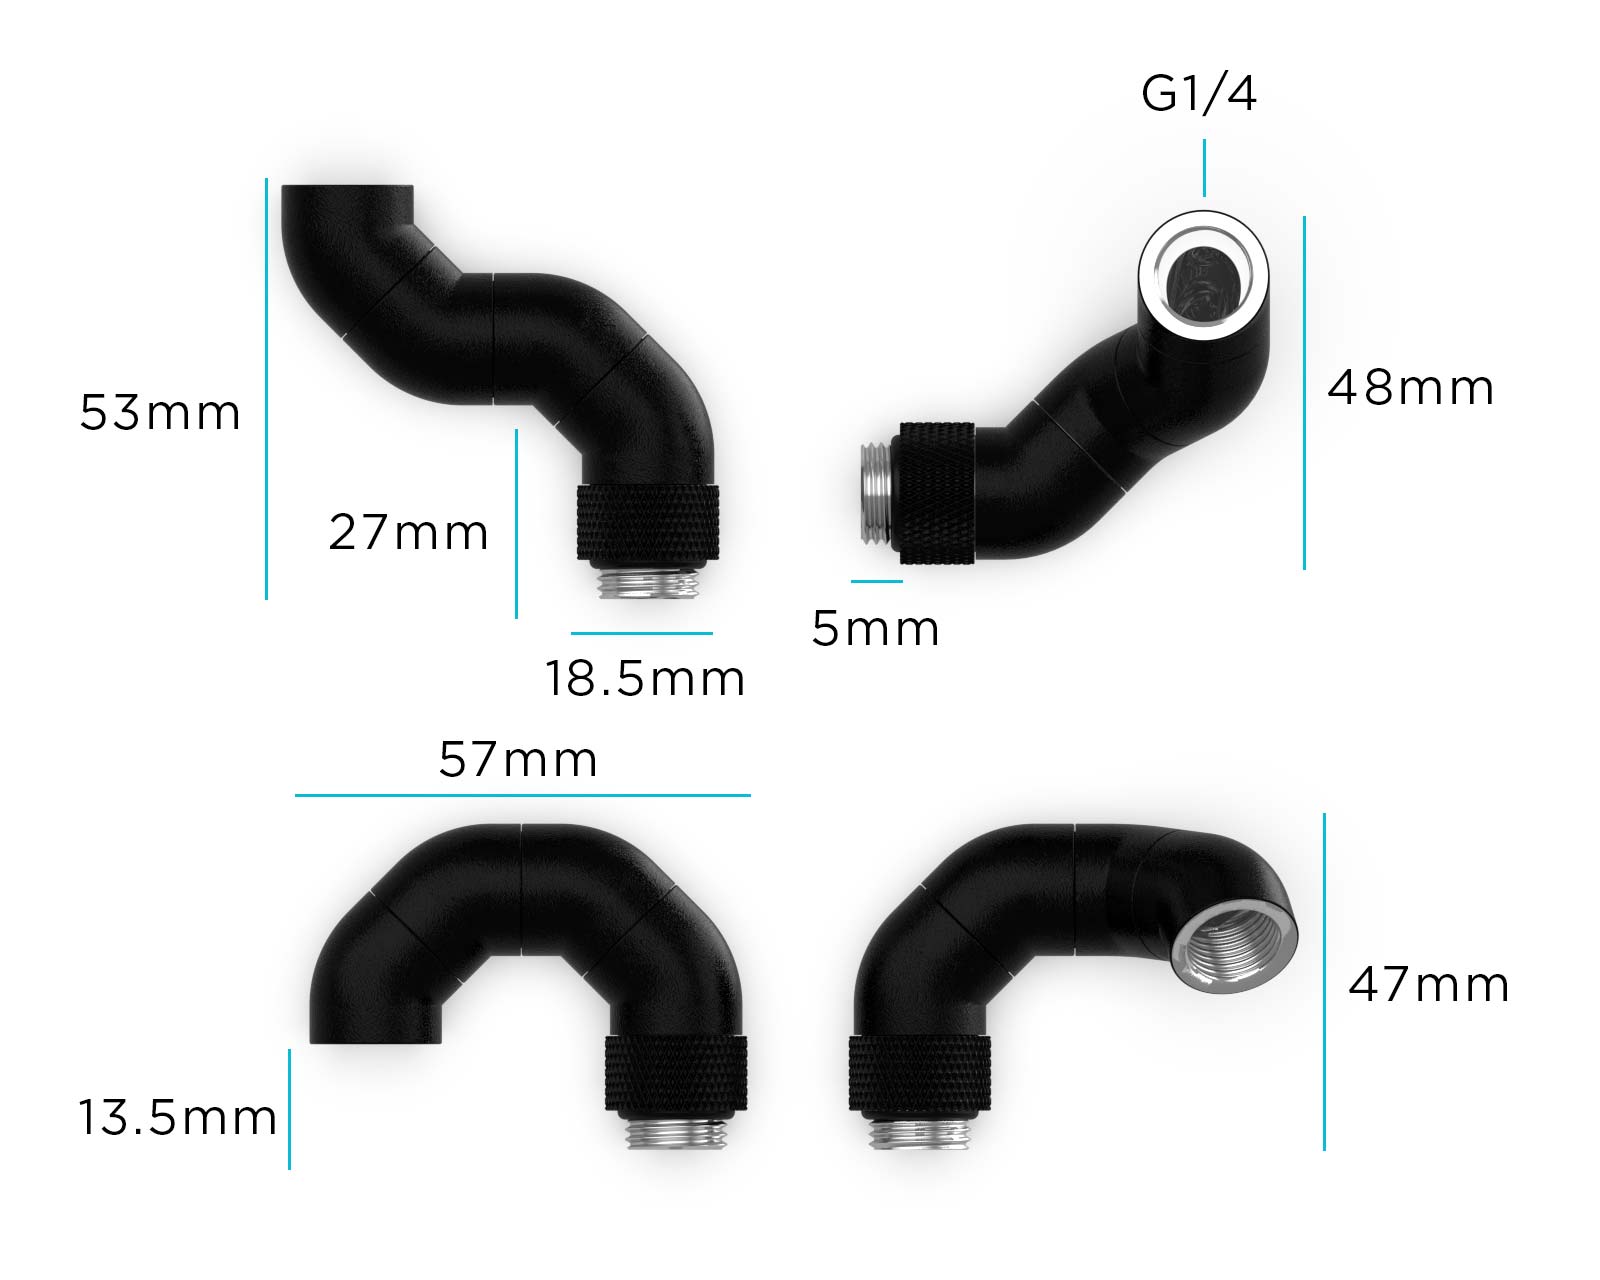 BSTOCK:PrimoChill Male to Female G 1/4in. 180 Degree SX Triple Rotary Elbow Fitting - Gold